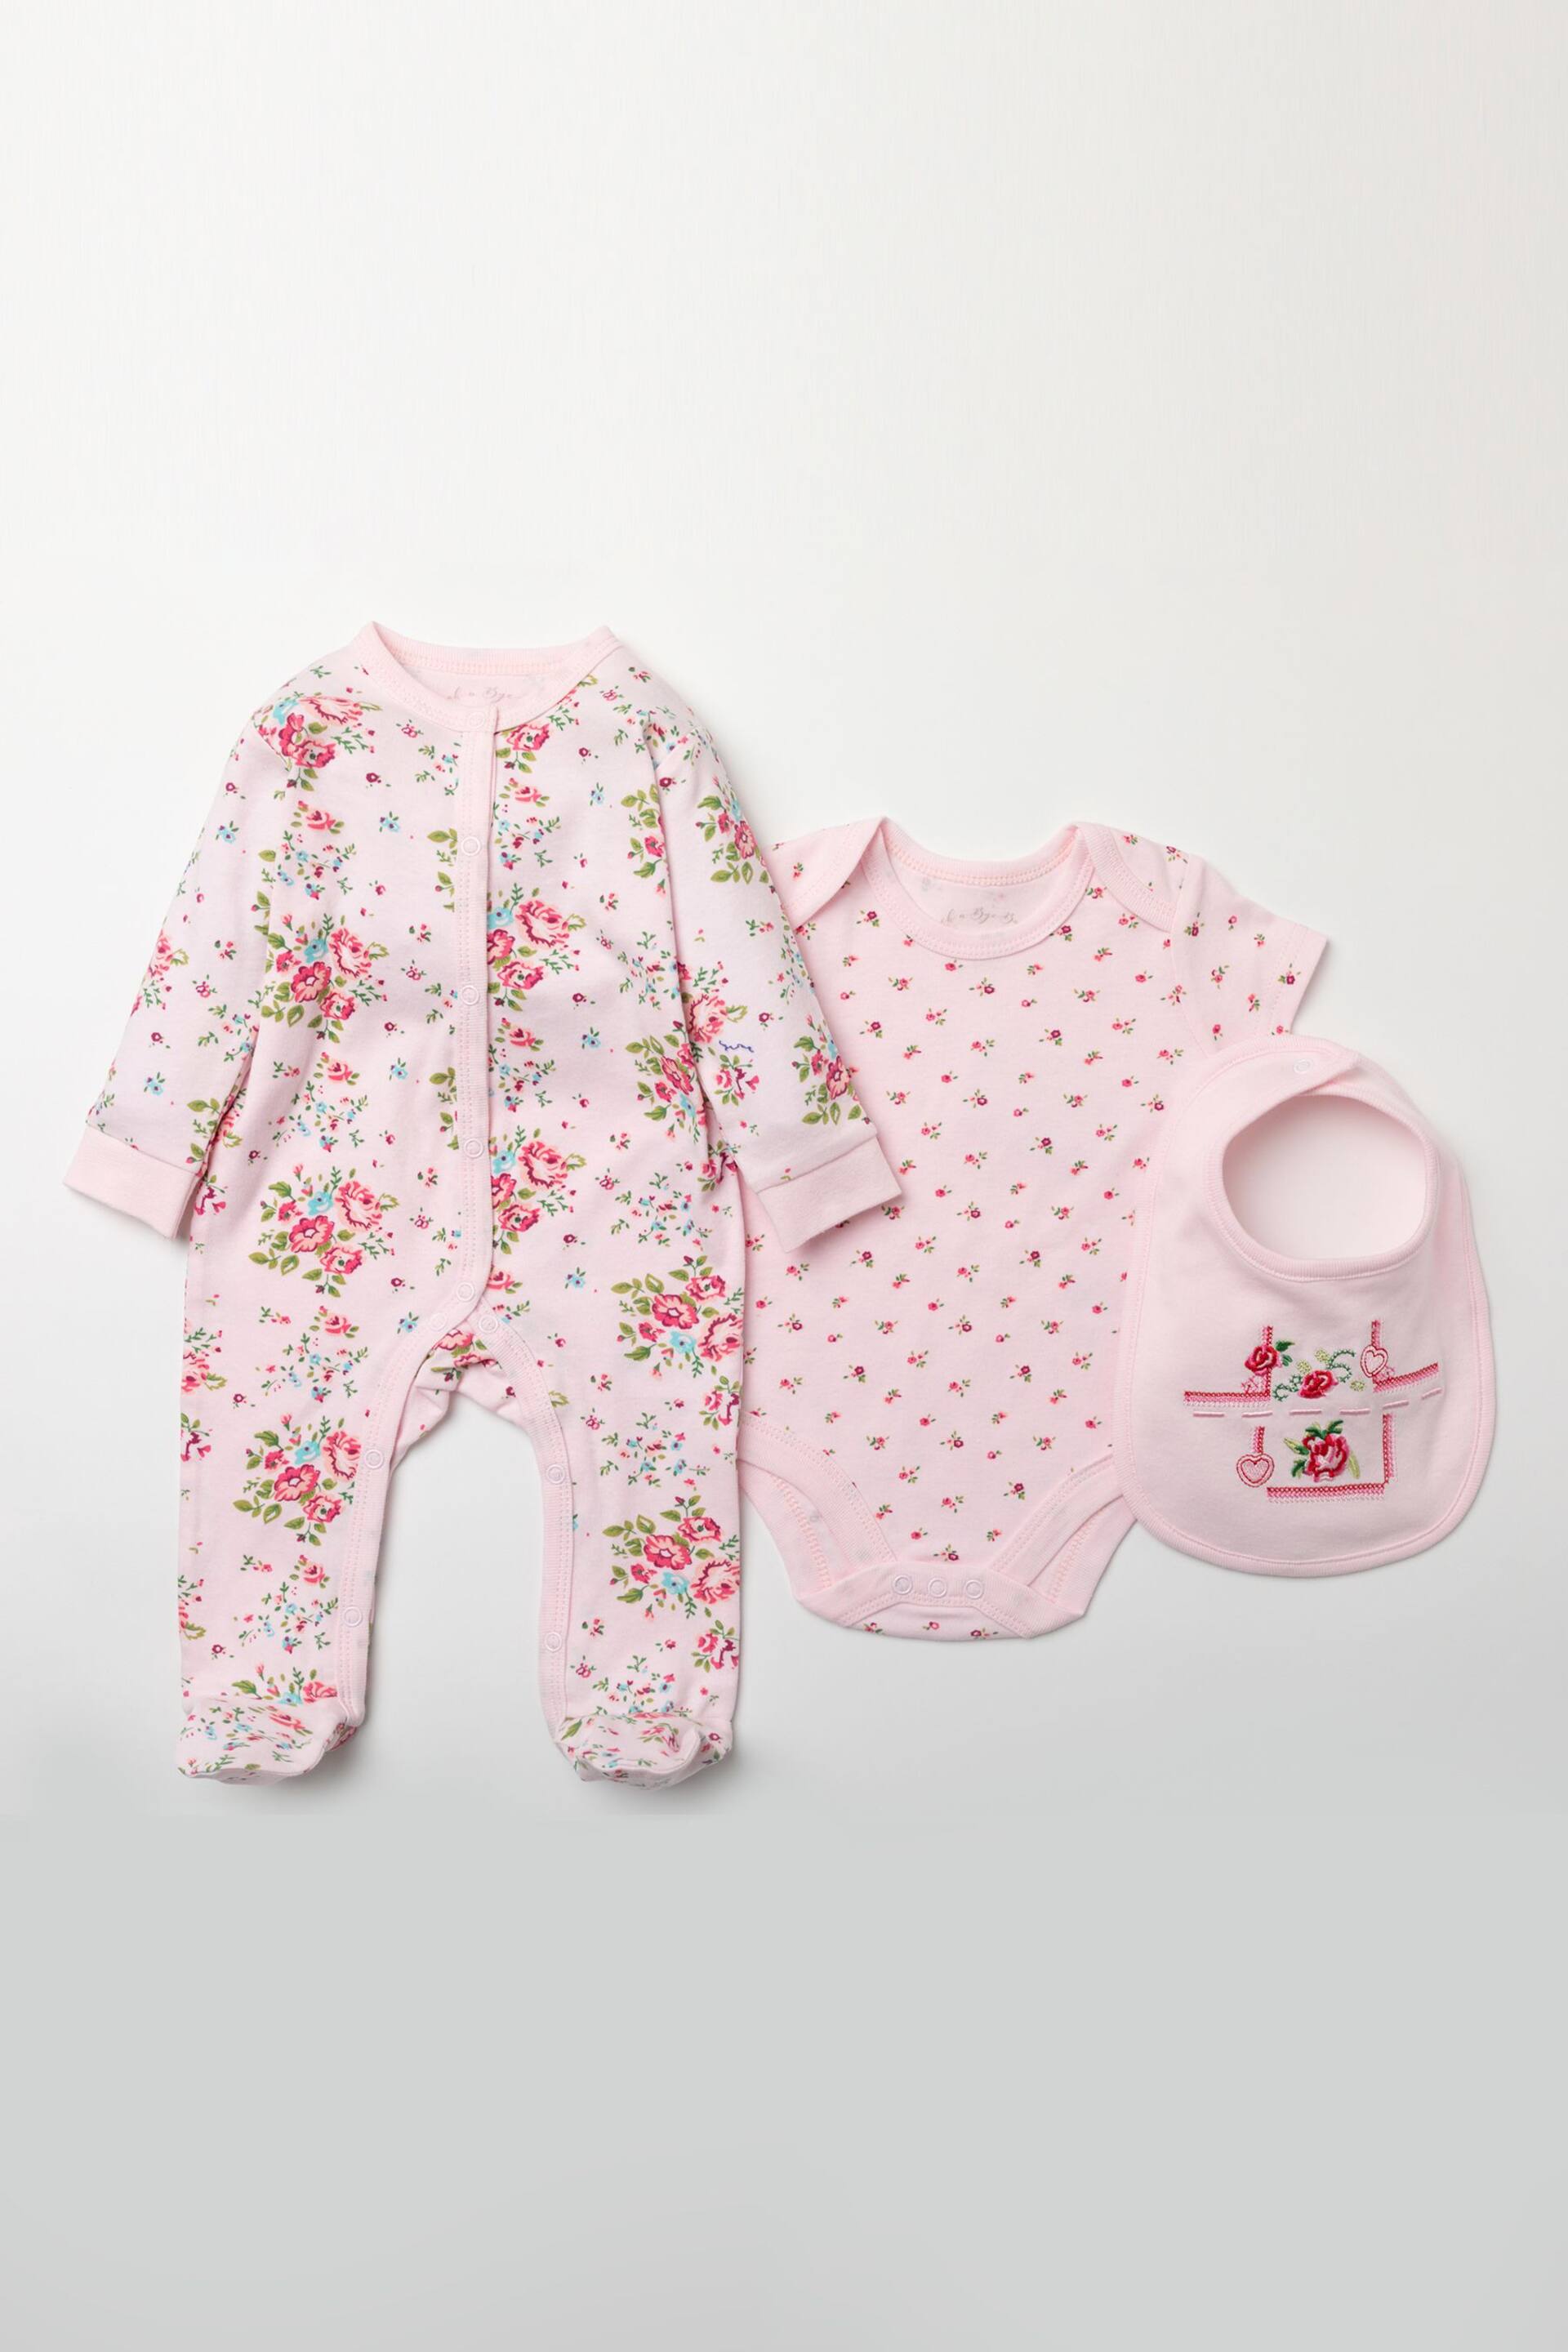 Rock-A-Bye Baby Boutique Pink Floral Print Cotton 3-Piece Baby Gift Set - Image 1 of 5